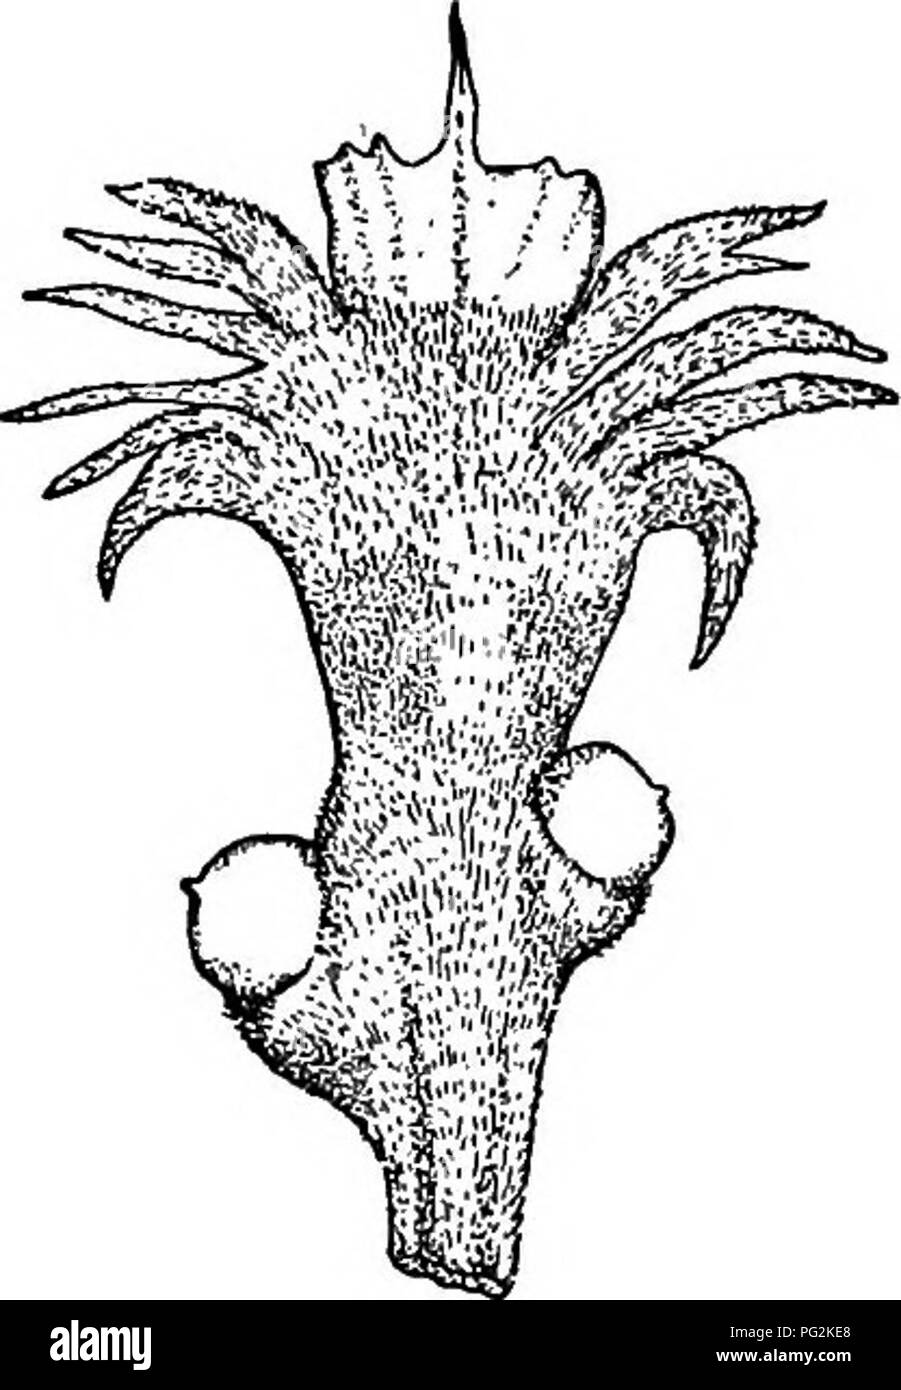 . Morphology of gymnosperms. Gymnosperms; Plant morphology. Fig. 114.-—Megasporophylls of cycads: A, Cycas revoluta; B, Cycas circinalis; C, Cycas Normanbyana; D, Dioon edule; E, Encephalartos Preissii; F, Zamia integ- rijoKa; G, Ceratozamia mexicana.—A, after Sachs; C and F, after Von MulleR; E, after MiQUEL; F, after Richard; B, D, and G, drawn for Engler and Prantl's Nat. Pflanzenj., from which the entire plate is taken. is much more compact; while in the remaining genera the sporophylls show very little of the leaflike character and are organized into hard compact strobili (fig. 92). In Cy Stock Photo